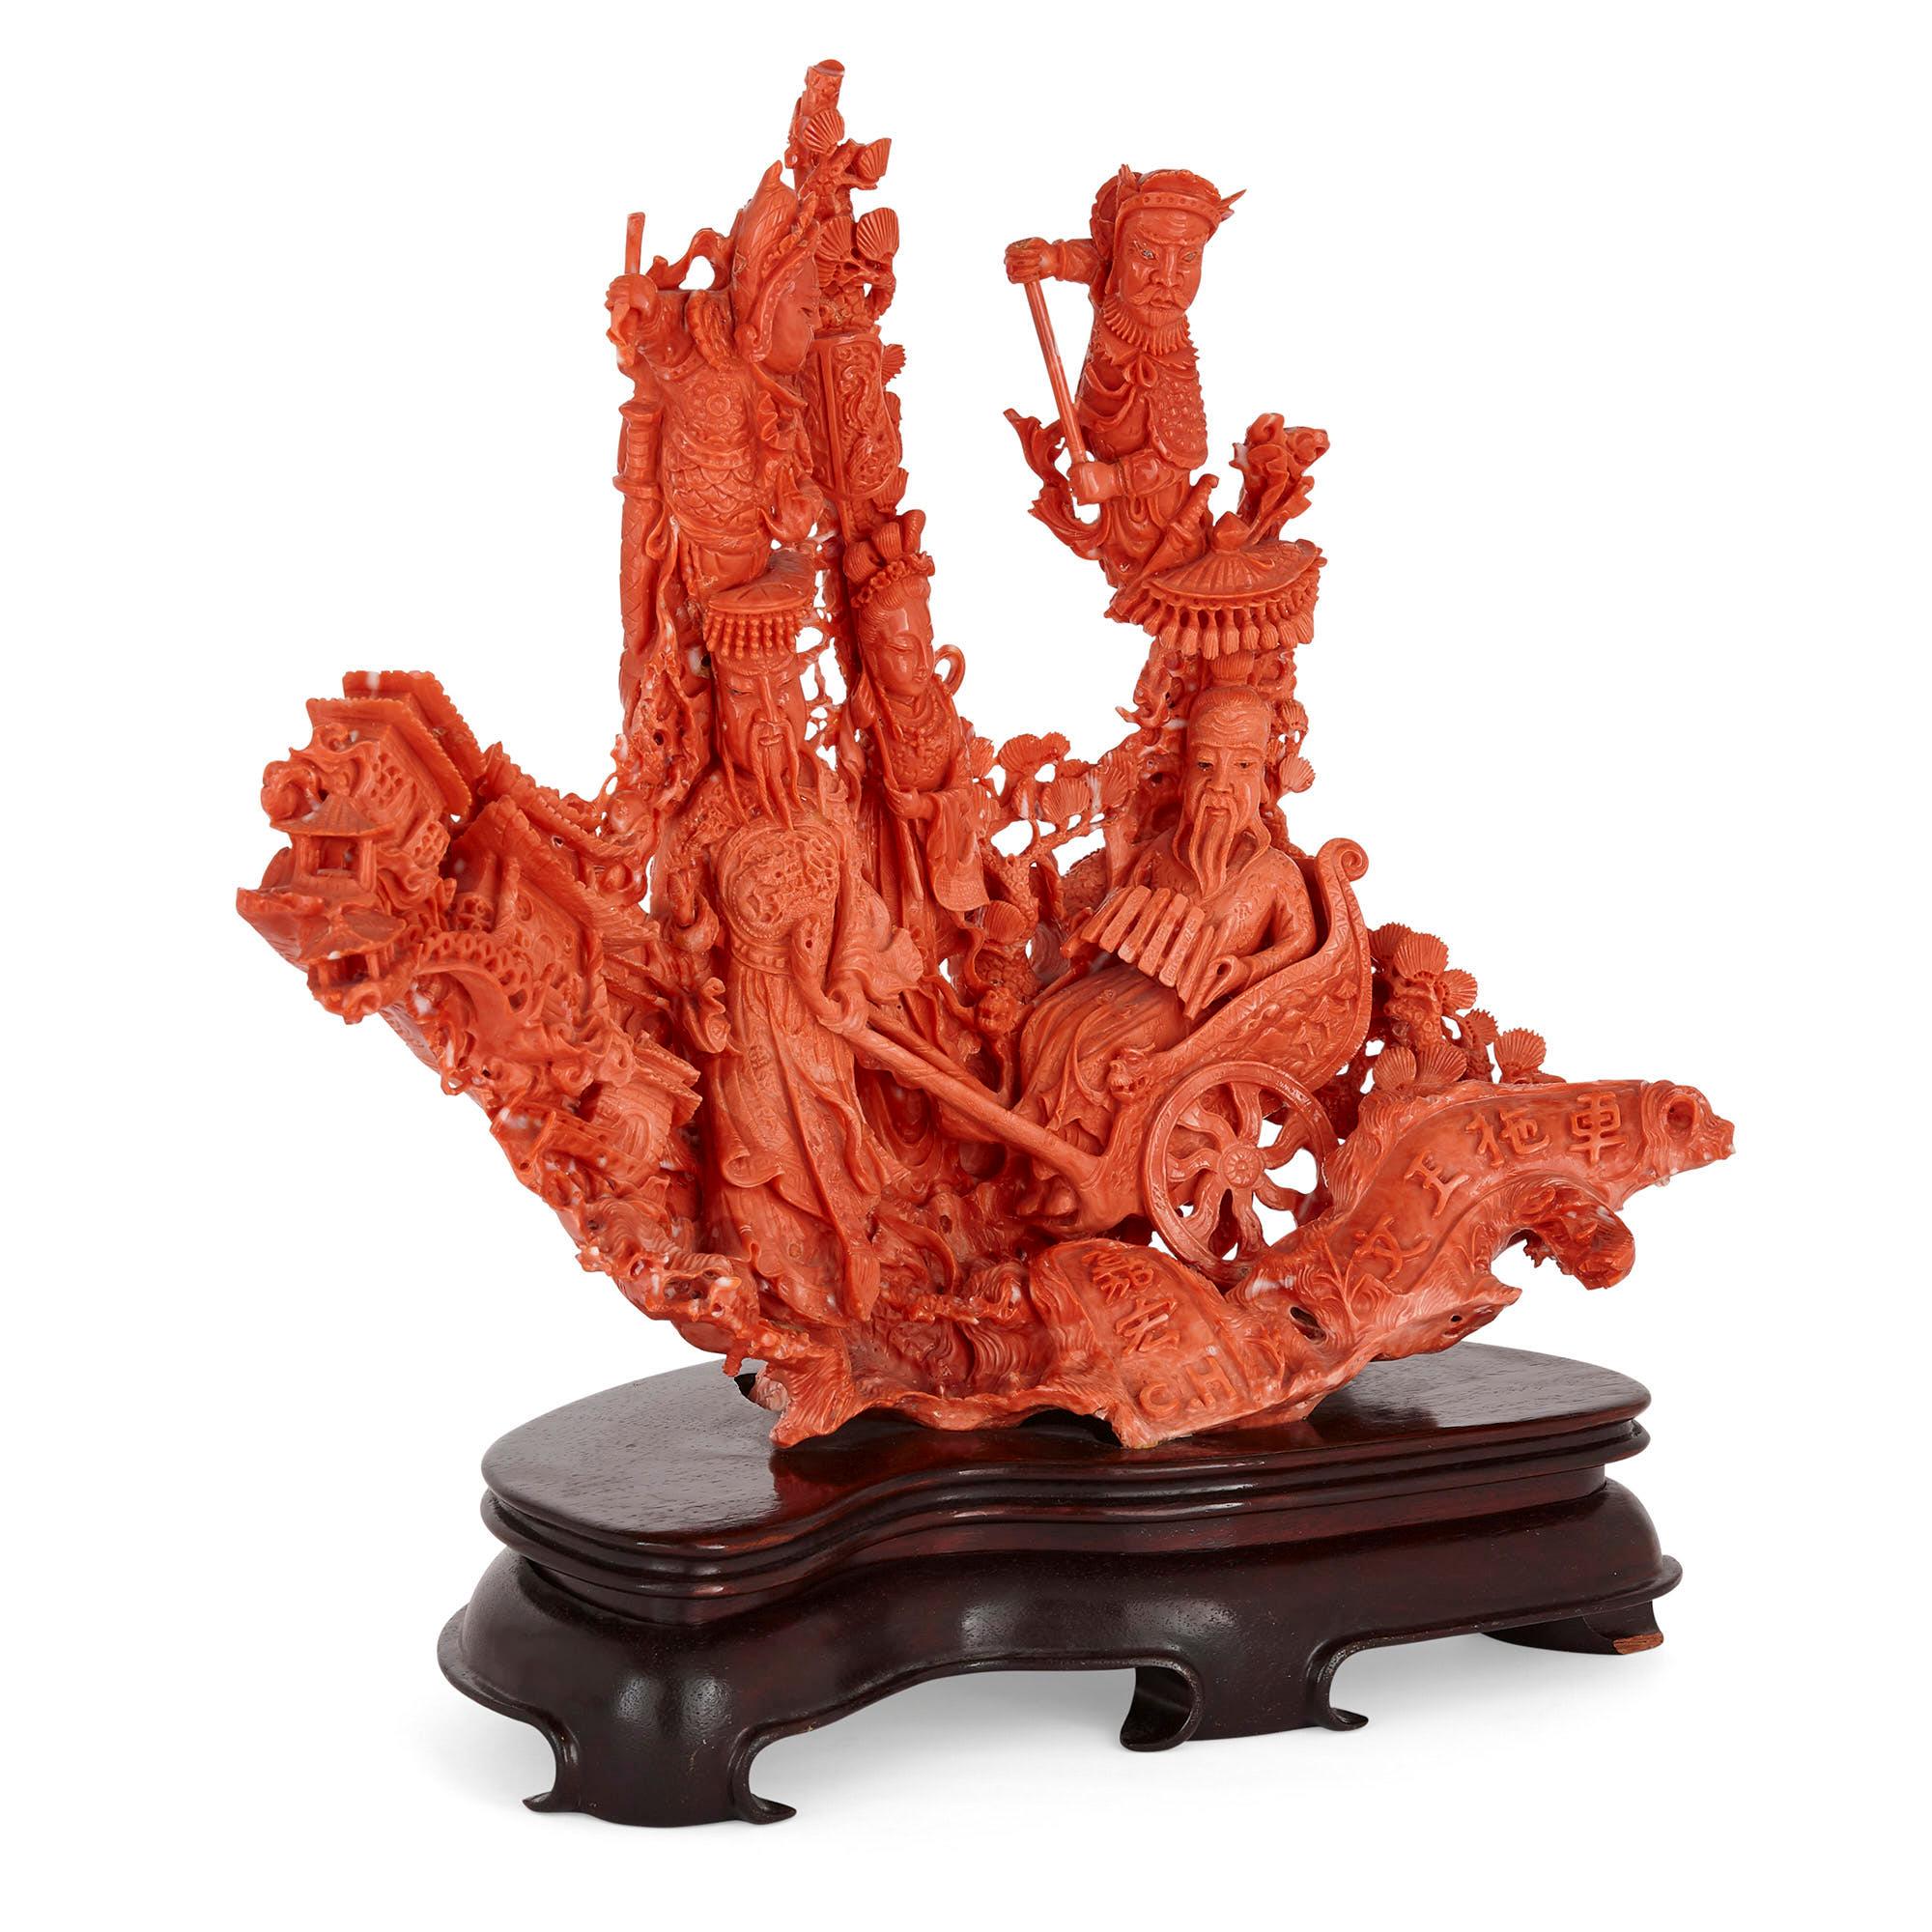 Large Chinese sculpted coral depicting a dignitary and attendants
Chinese, early 20th Century
Measures: Height 38cm, width 40cm, depth 20cm

Taking beautiful natural red coral as a medium, this magnificent piece of Chinese sculpture is a